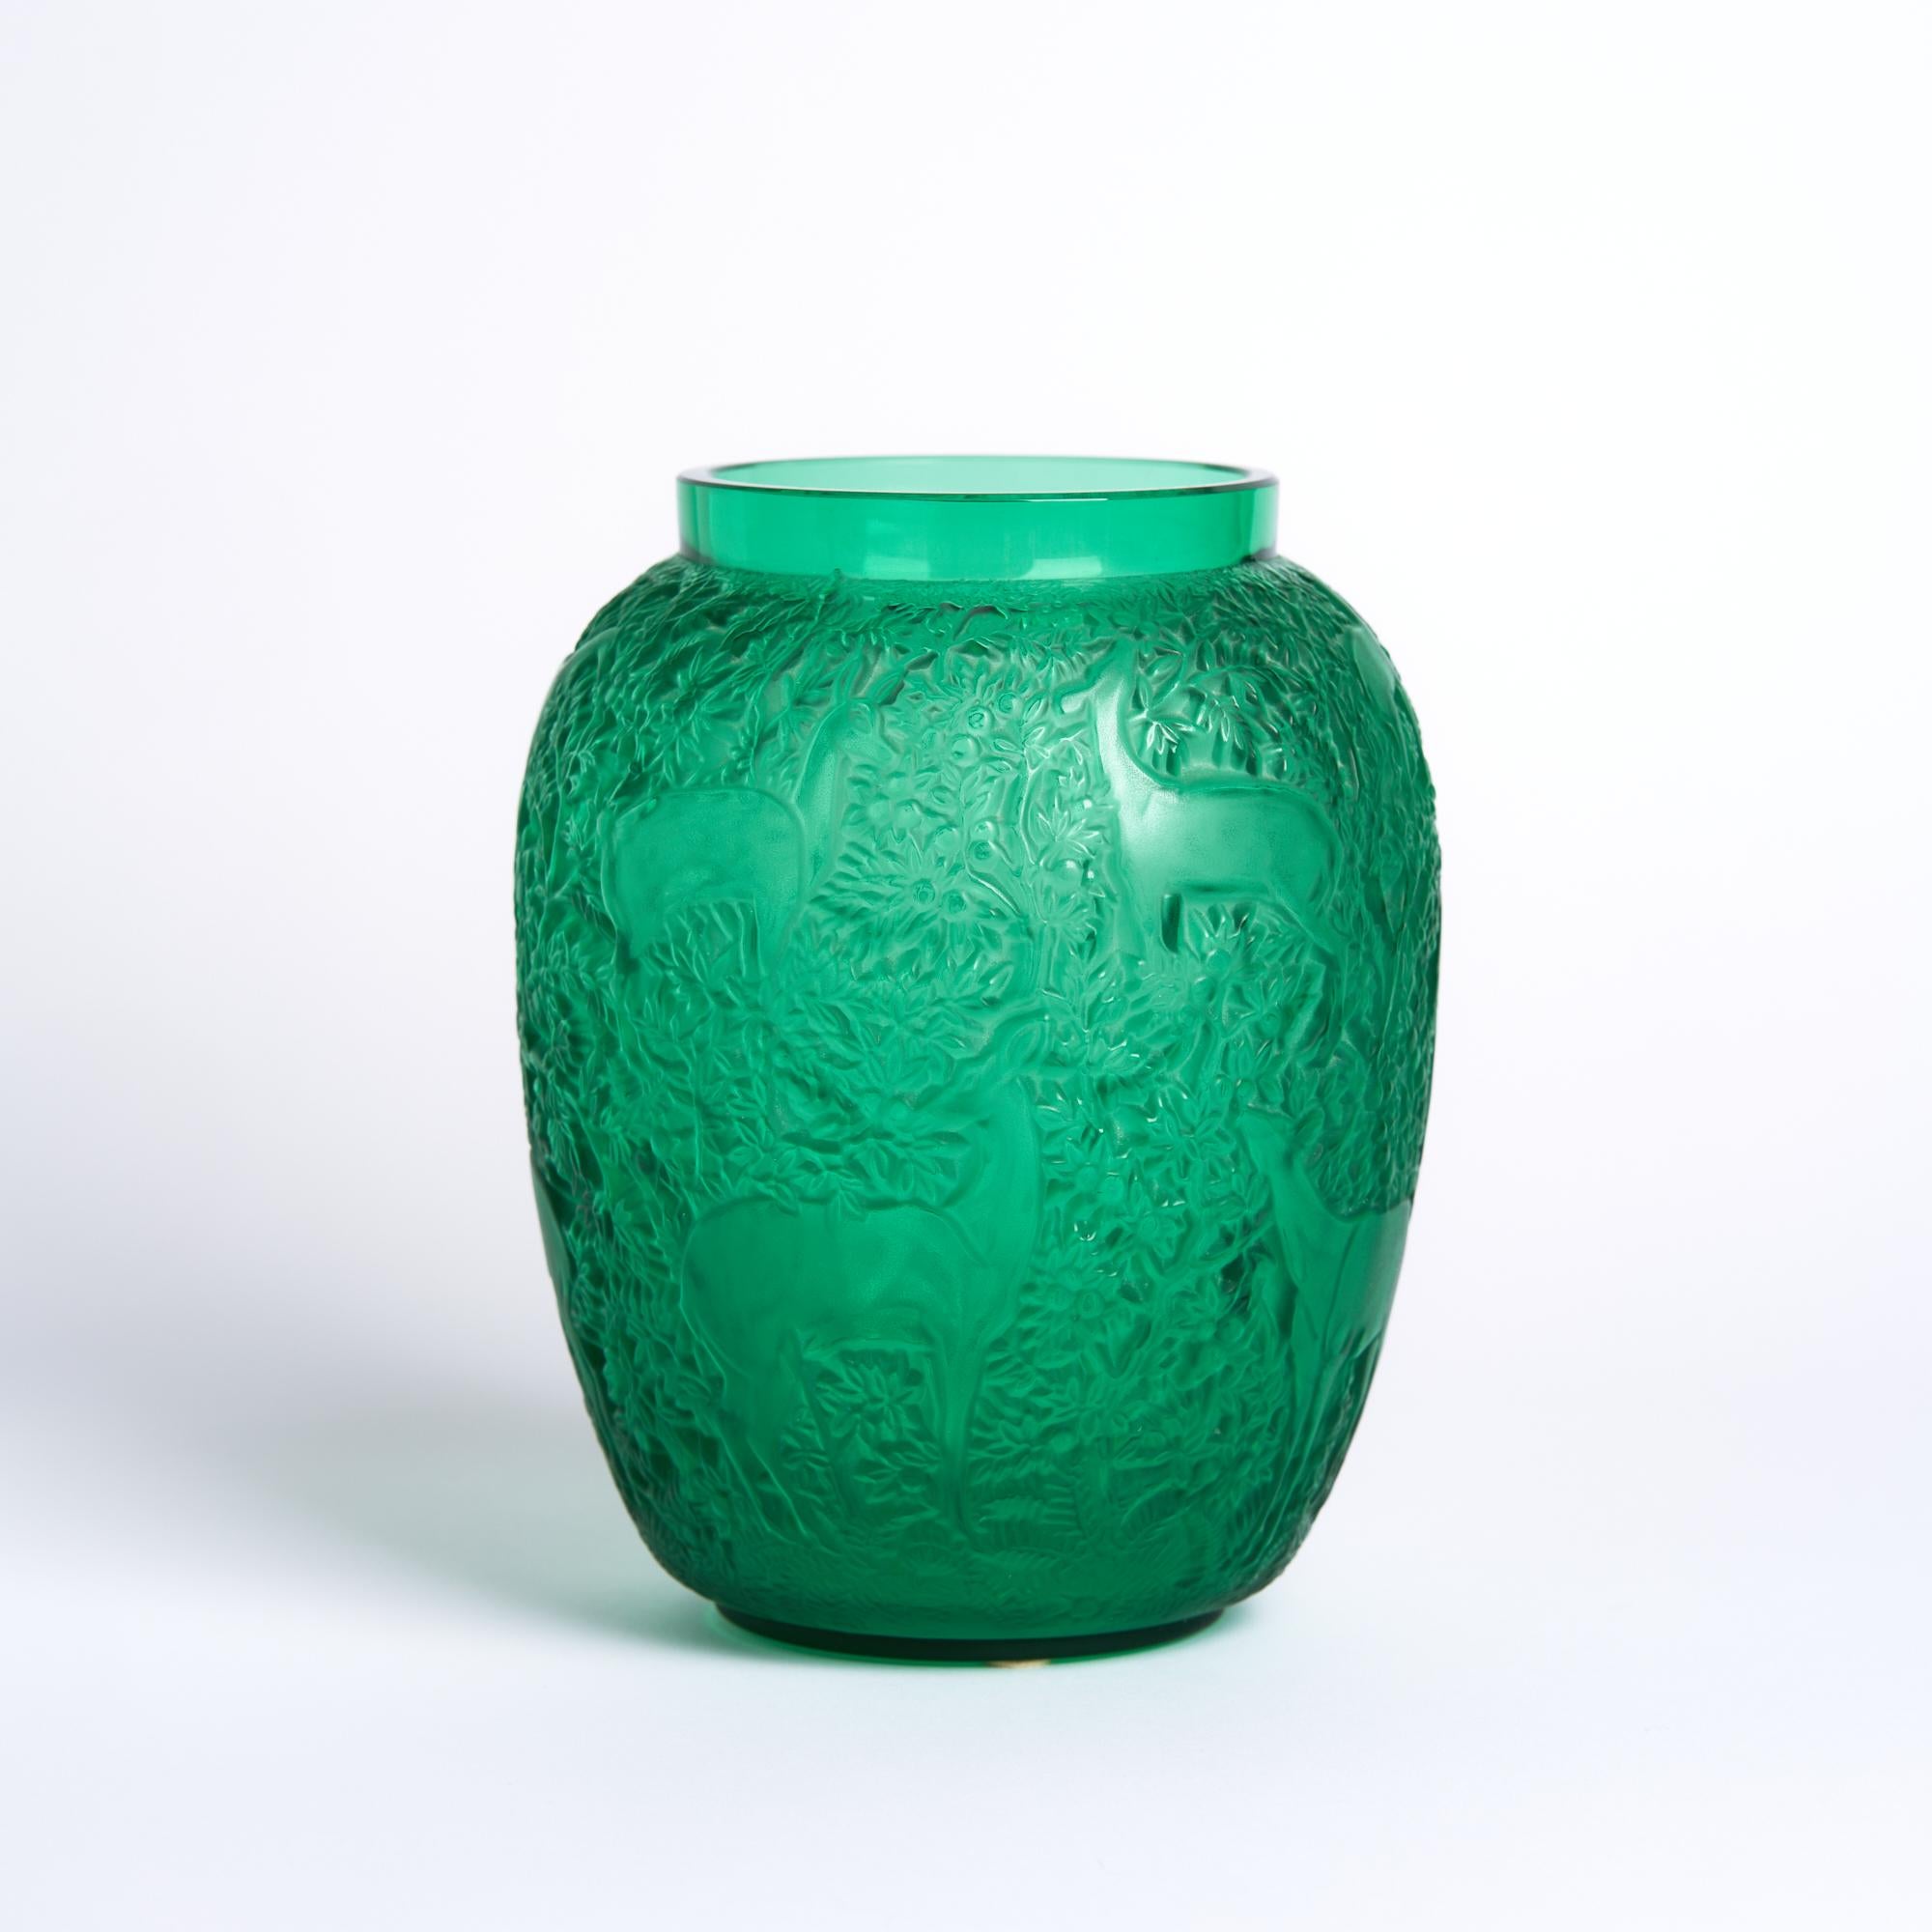 Lalique green glass biches vase

This vase measures: 5.5 wide x 5.5 deep x 6.75 inches high 

This vase is in Great Vintage Condition

We take our photos in a controlled lighting studio to show as much detail as possible. We do not photoshop